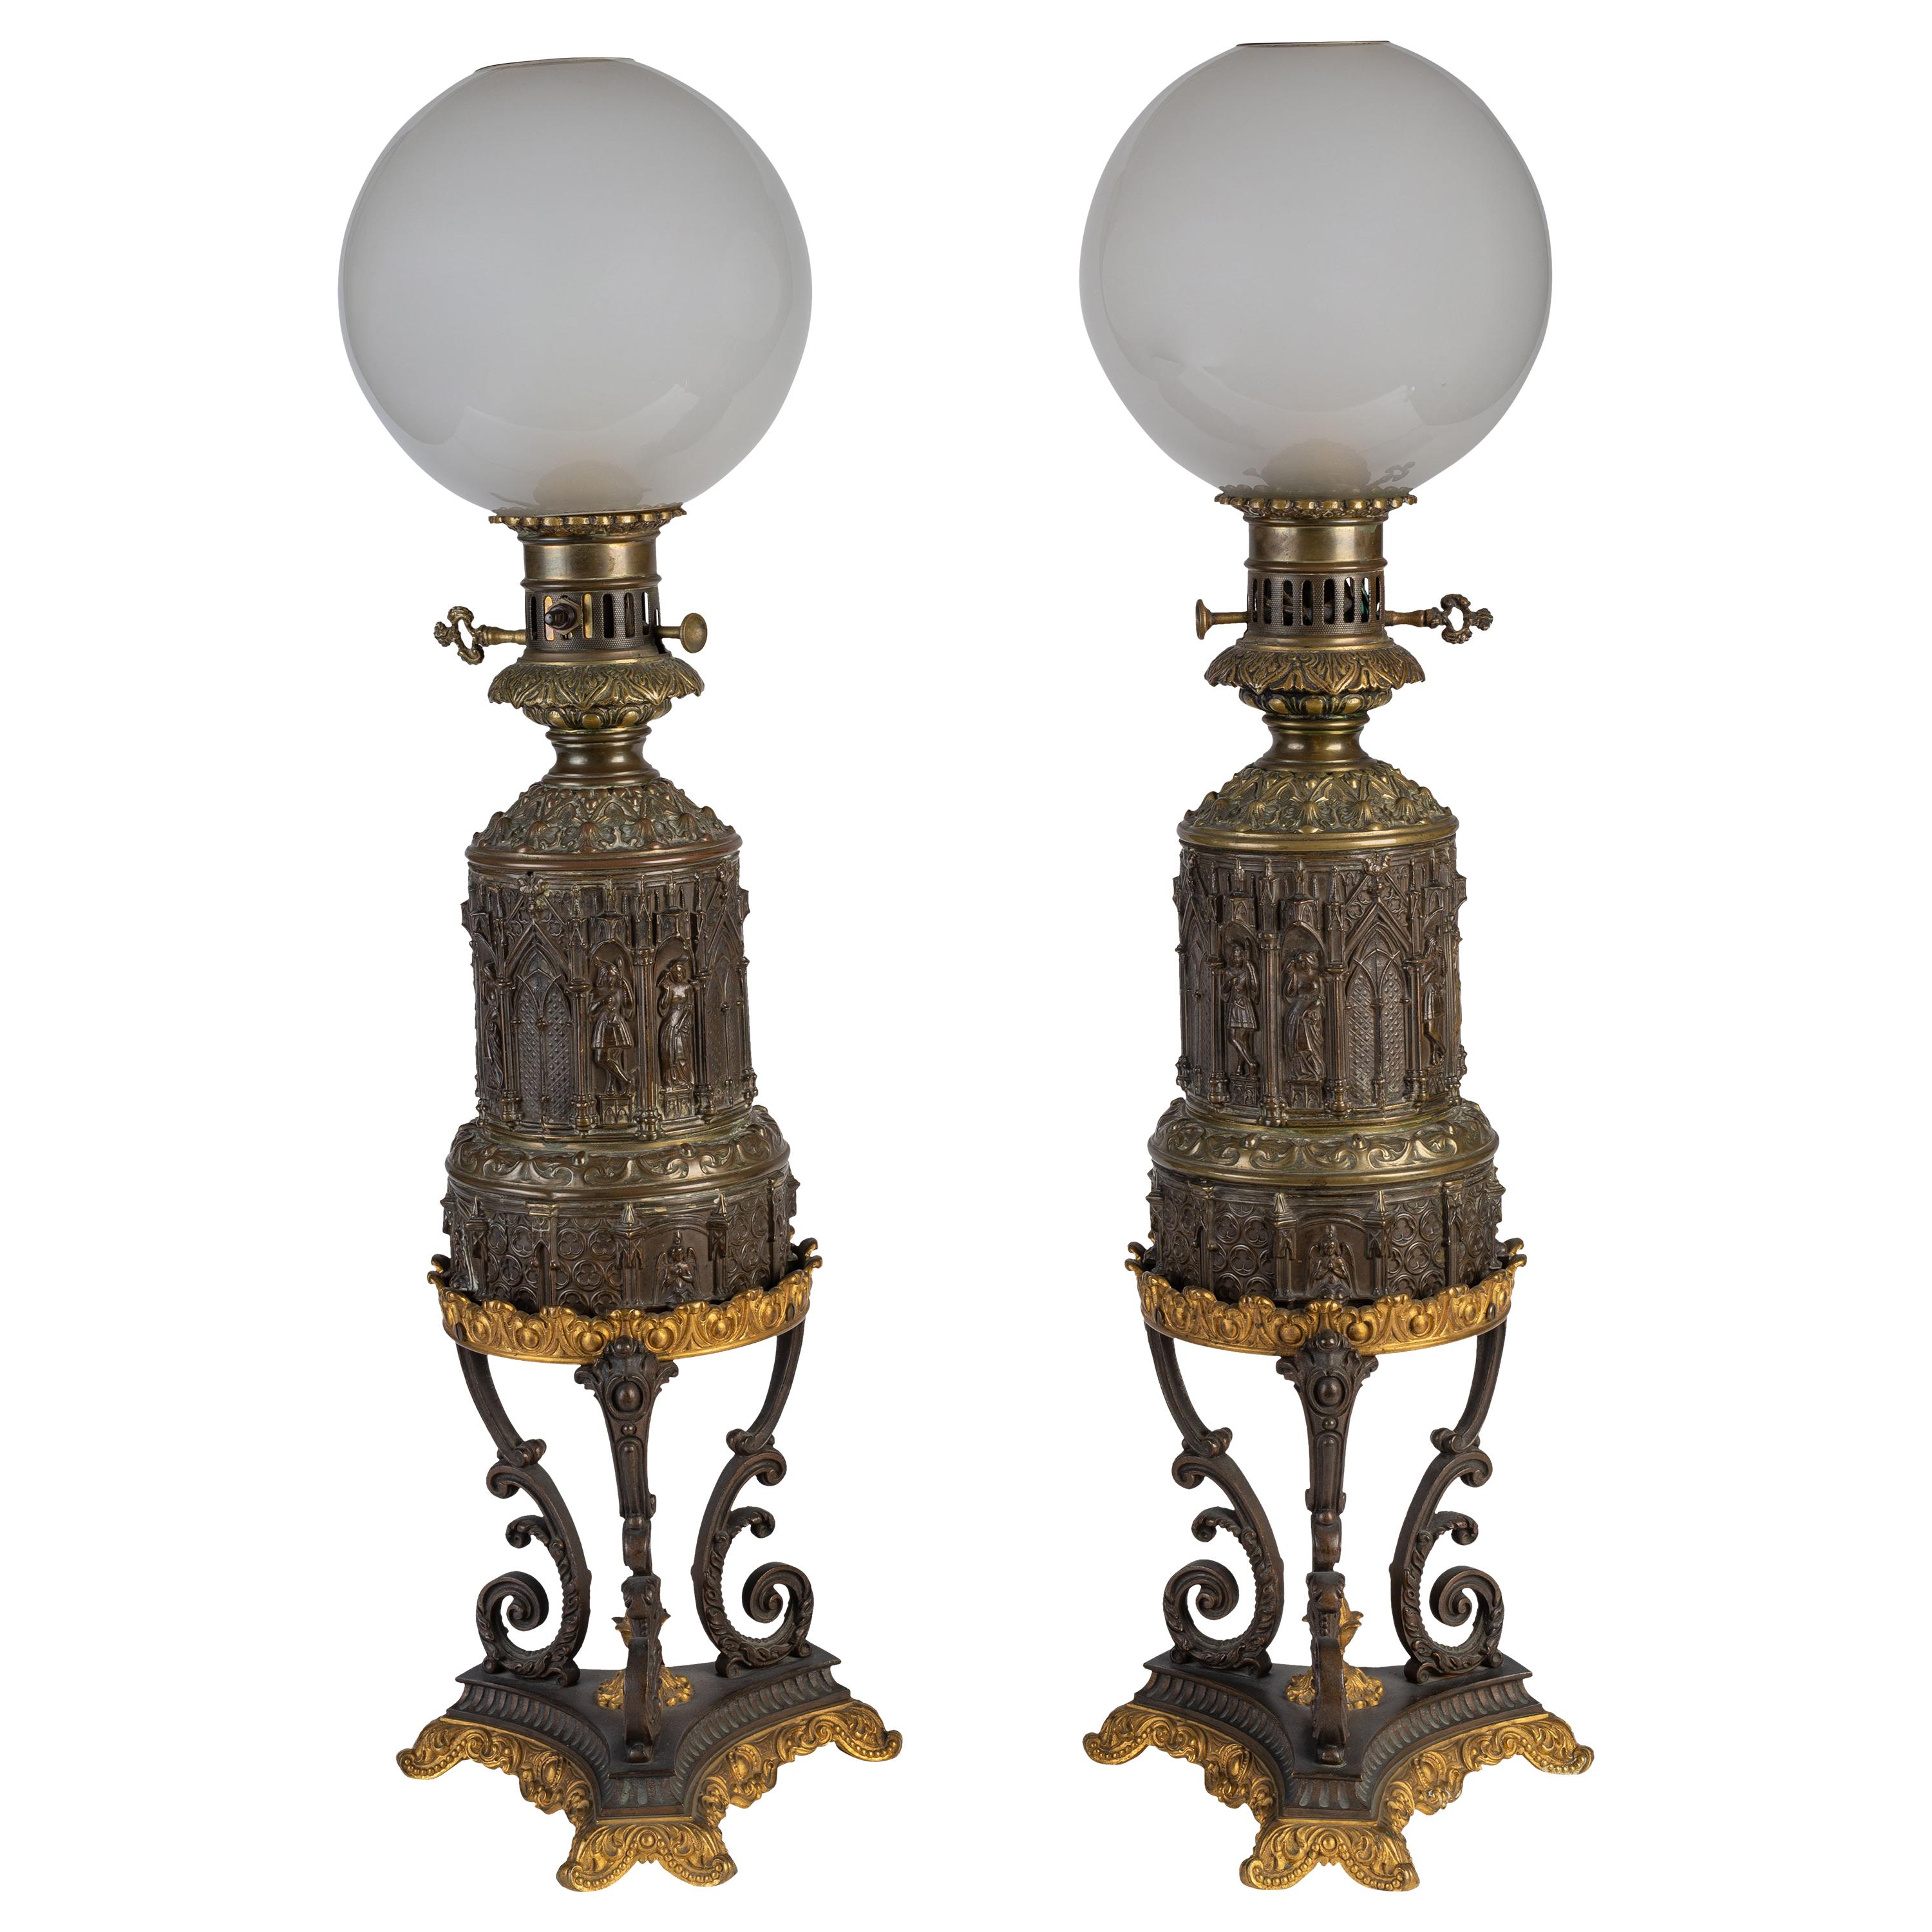 Pair of Gothic Revival Gilt and Patinated Bronze Oil Lamps